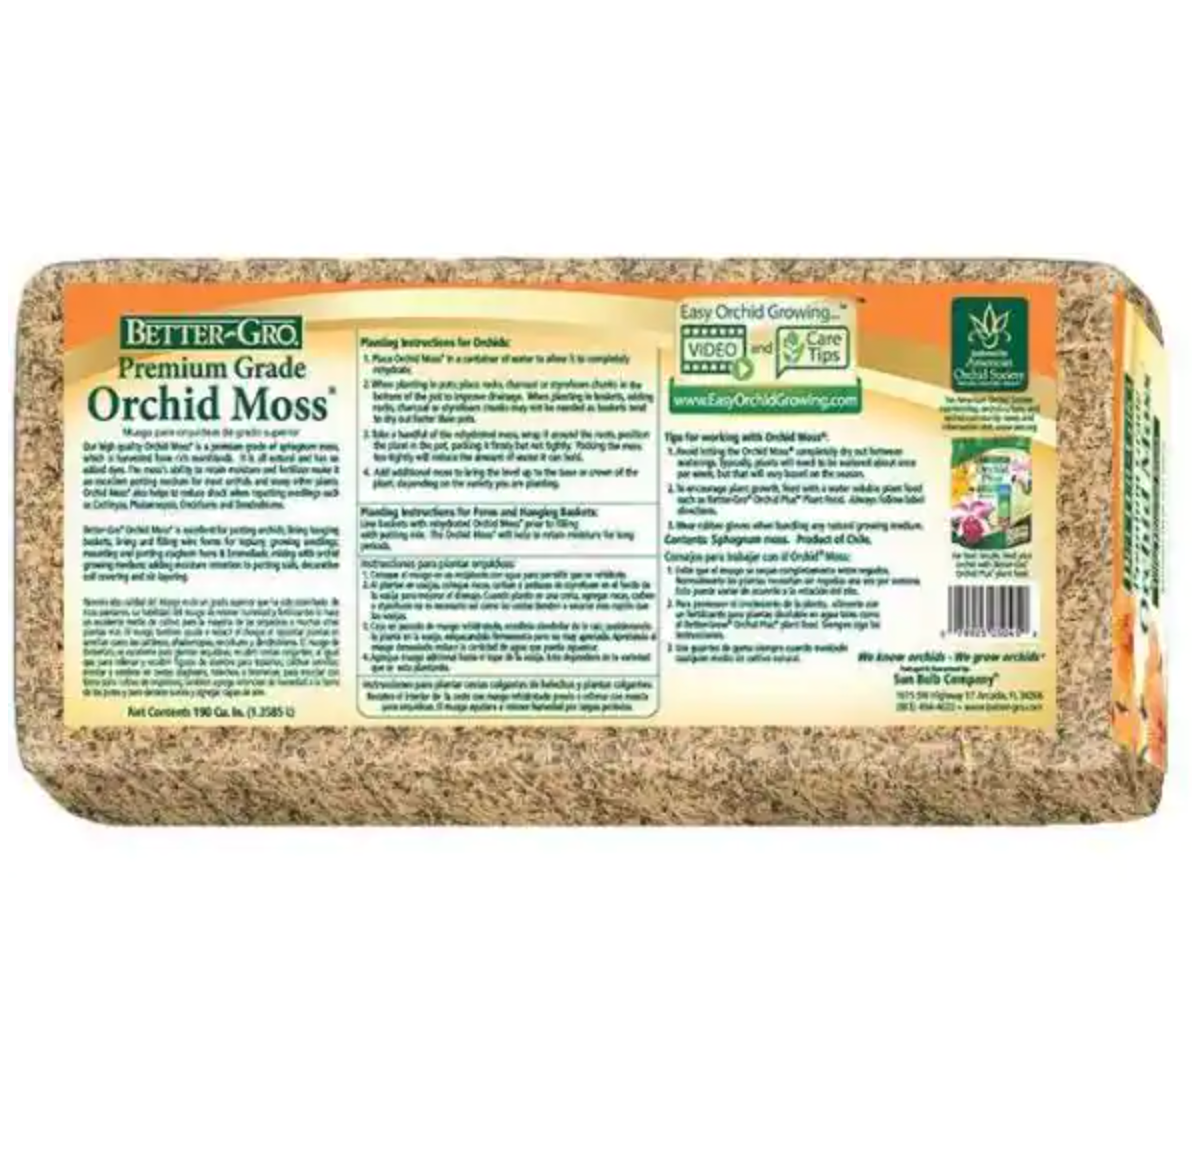 Orchid Moss